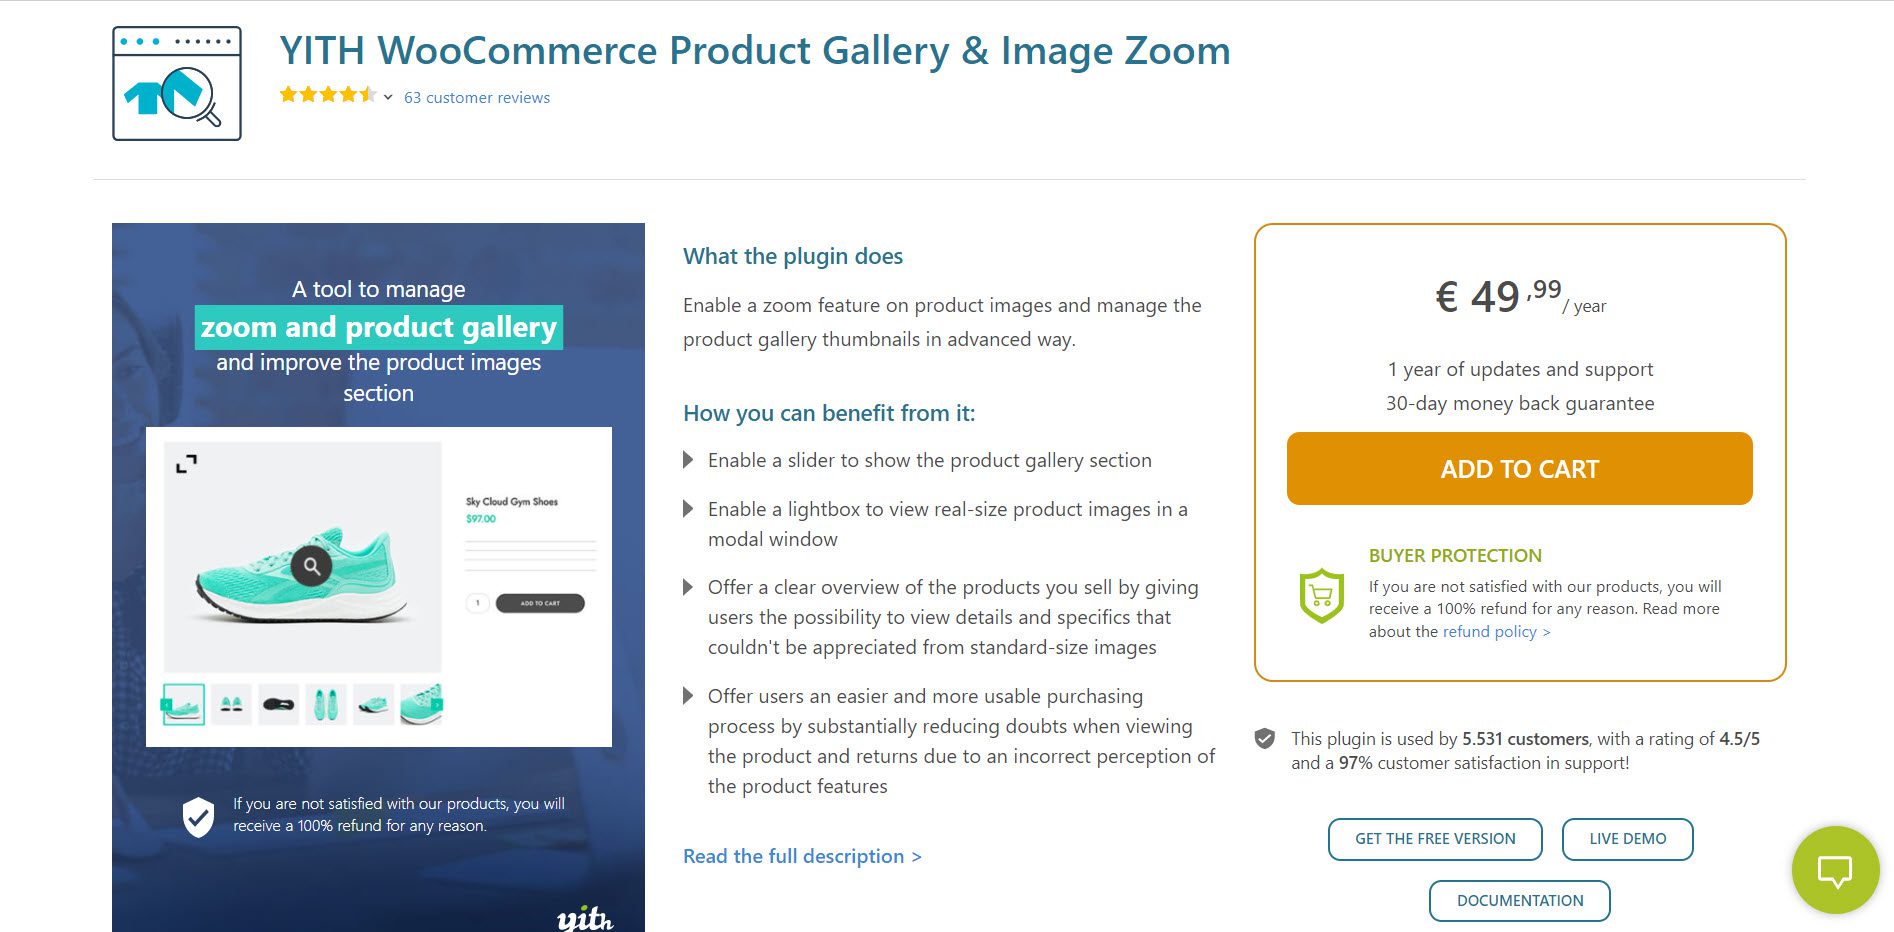 yith woocommerce product gallery & image zoom 